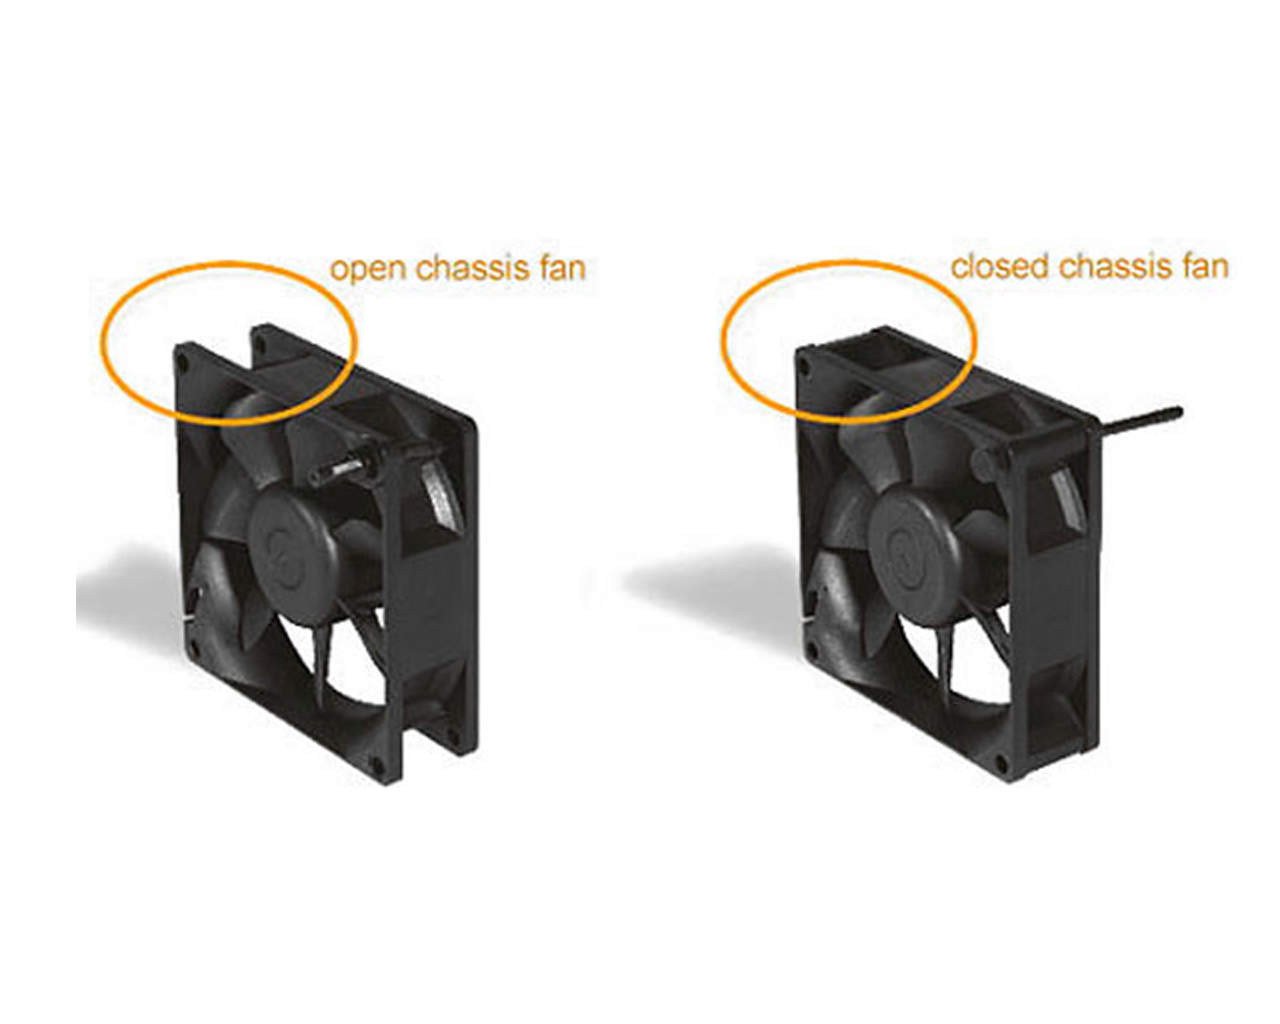 Riveted Rubber Fan Push Pins for Open Chassis Fan - Black - 4 Pack - PrimoChill - KEEPING IT COOL